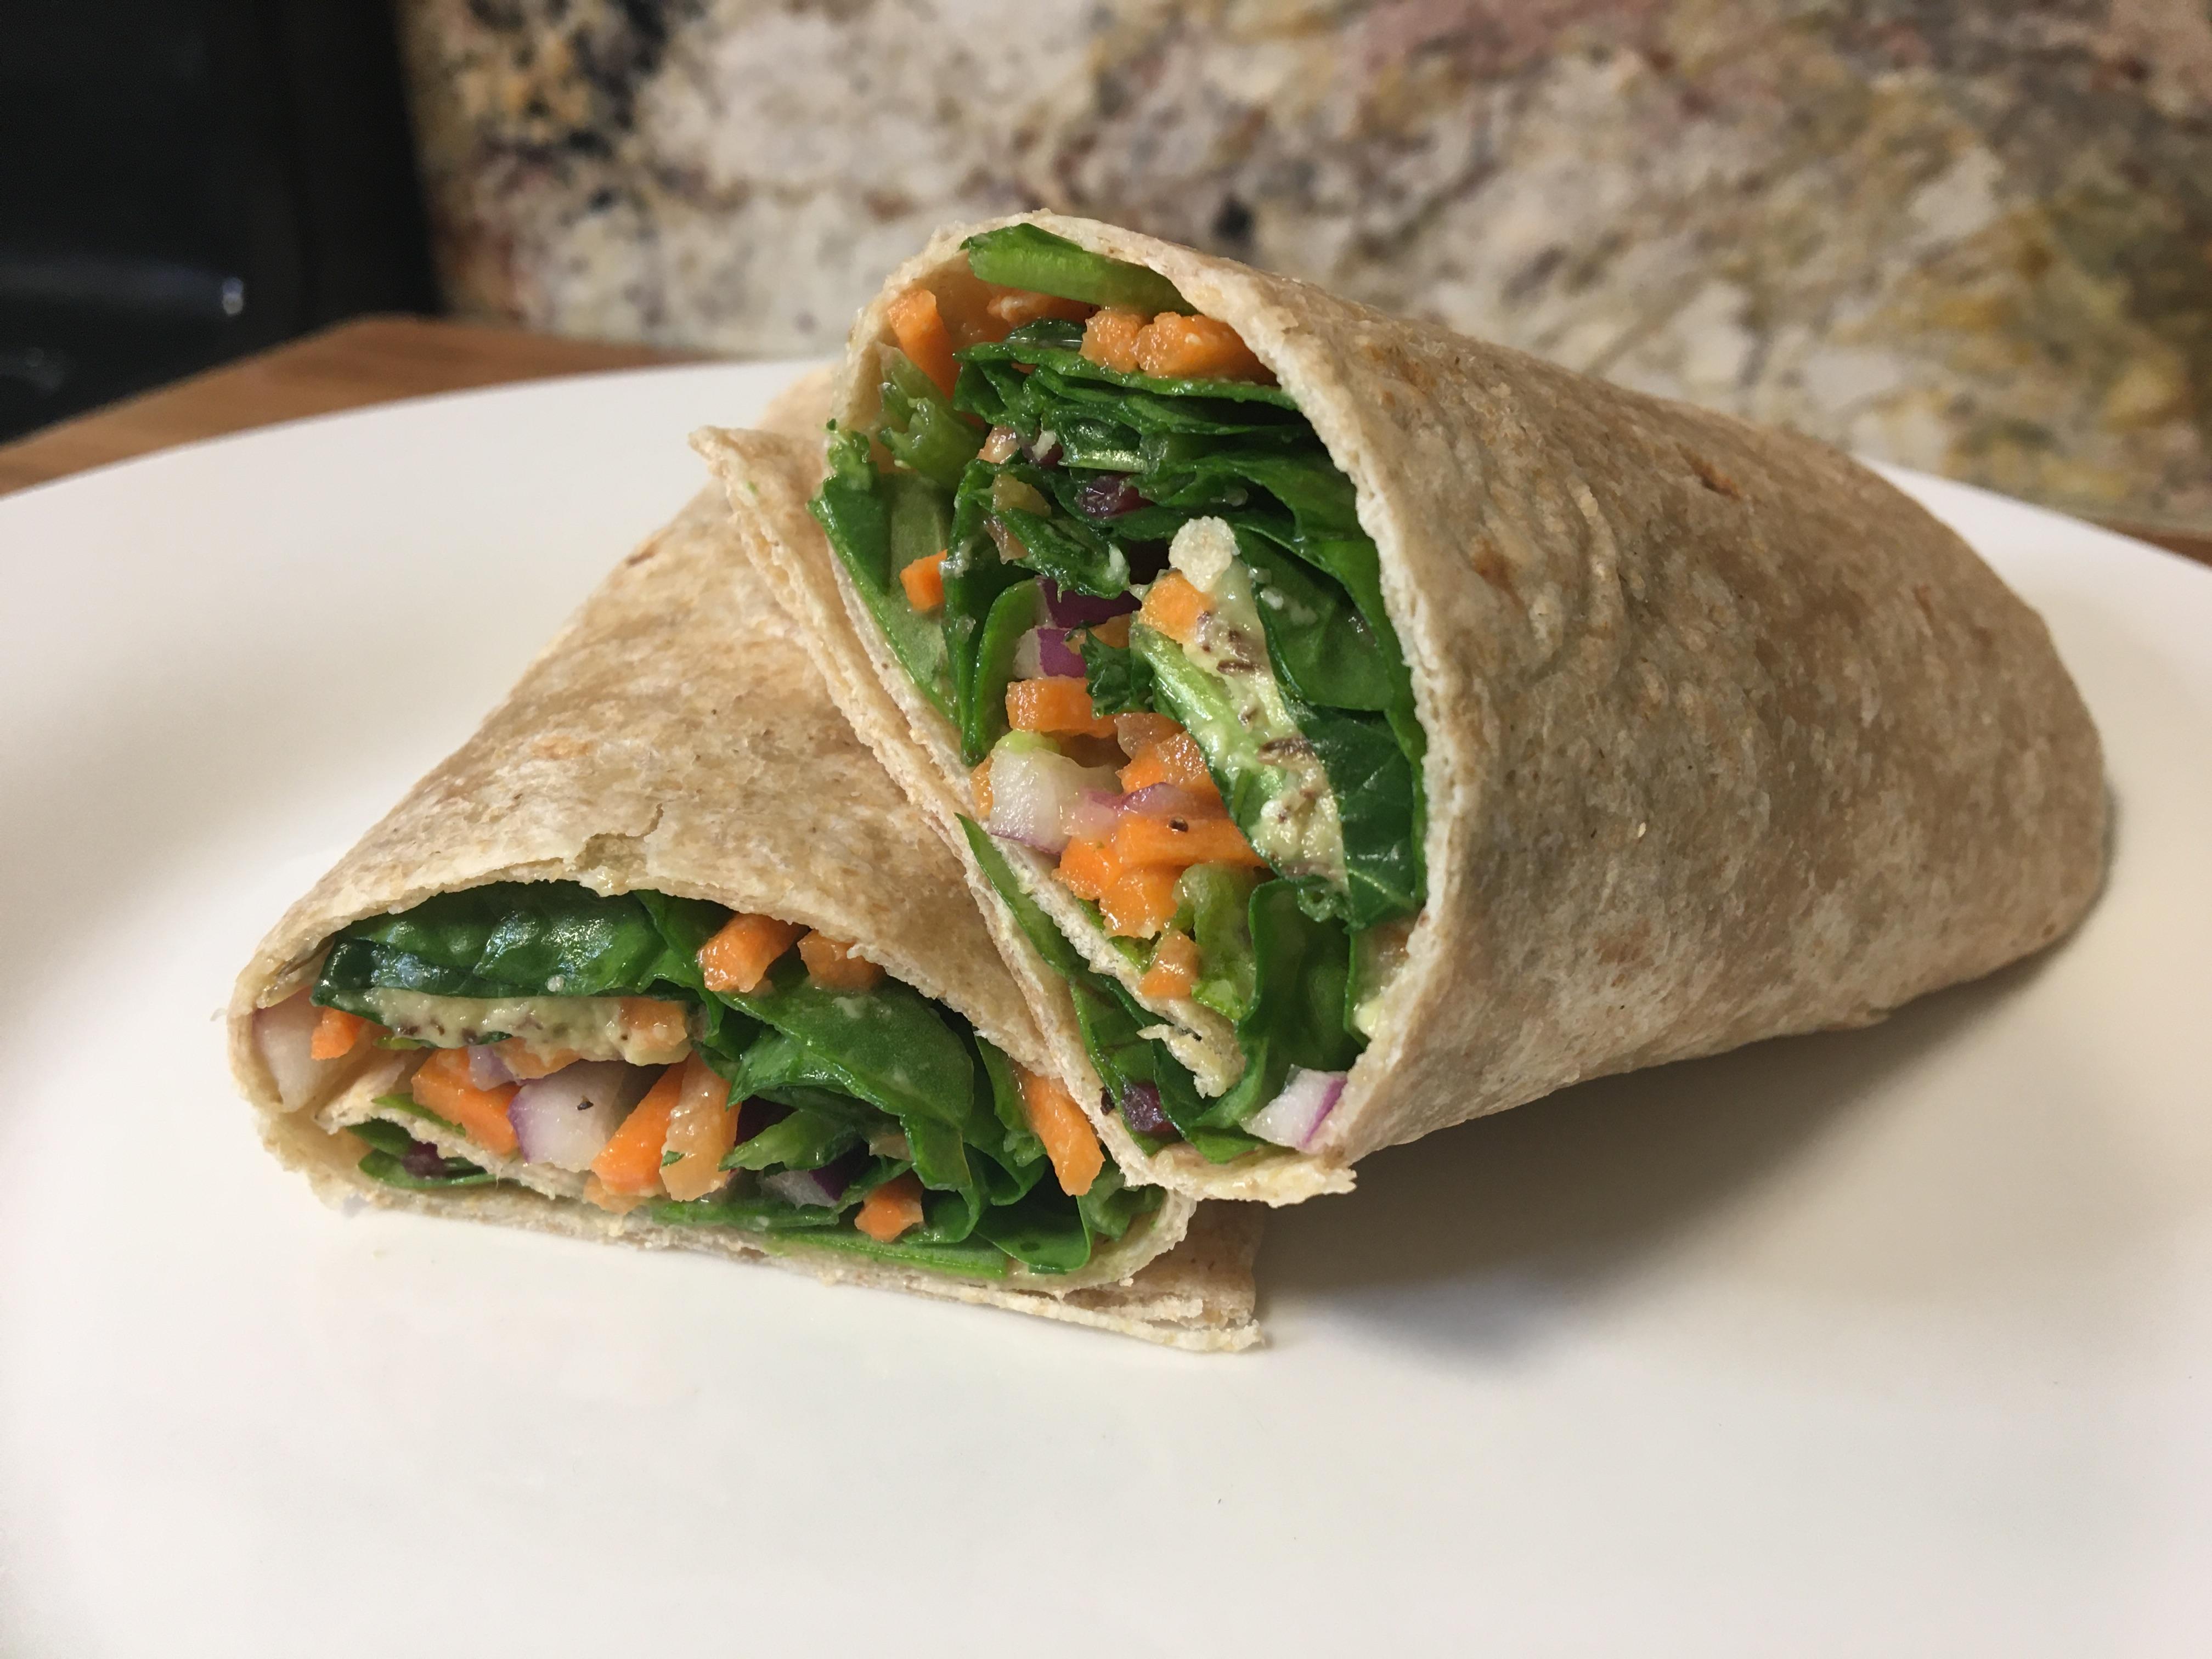 Whole wheat tortilla filled with swiss chard, avocado, tomato and carrots.